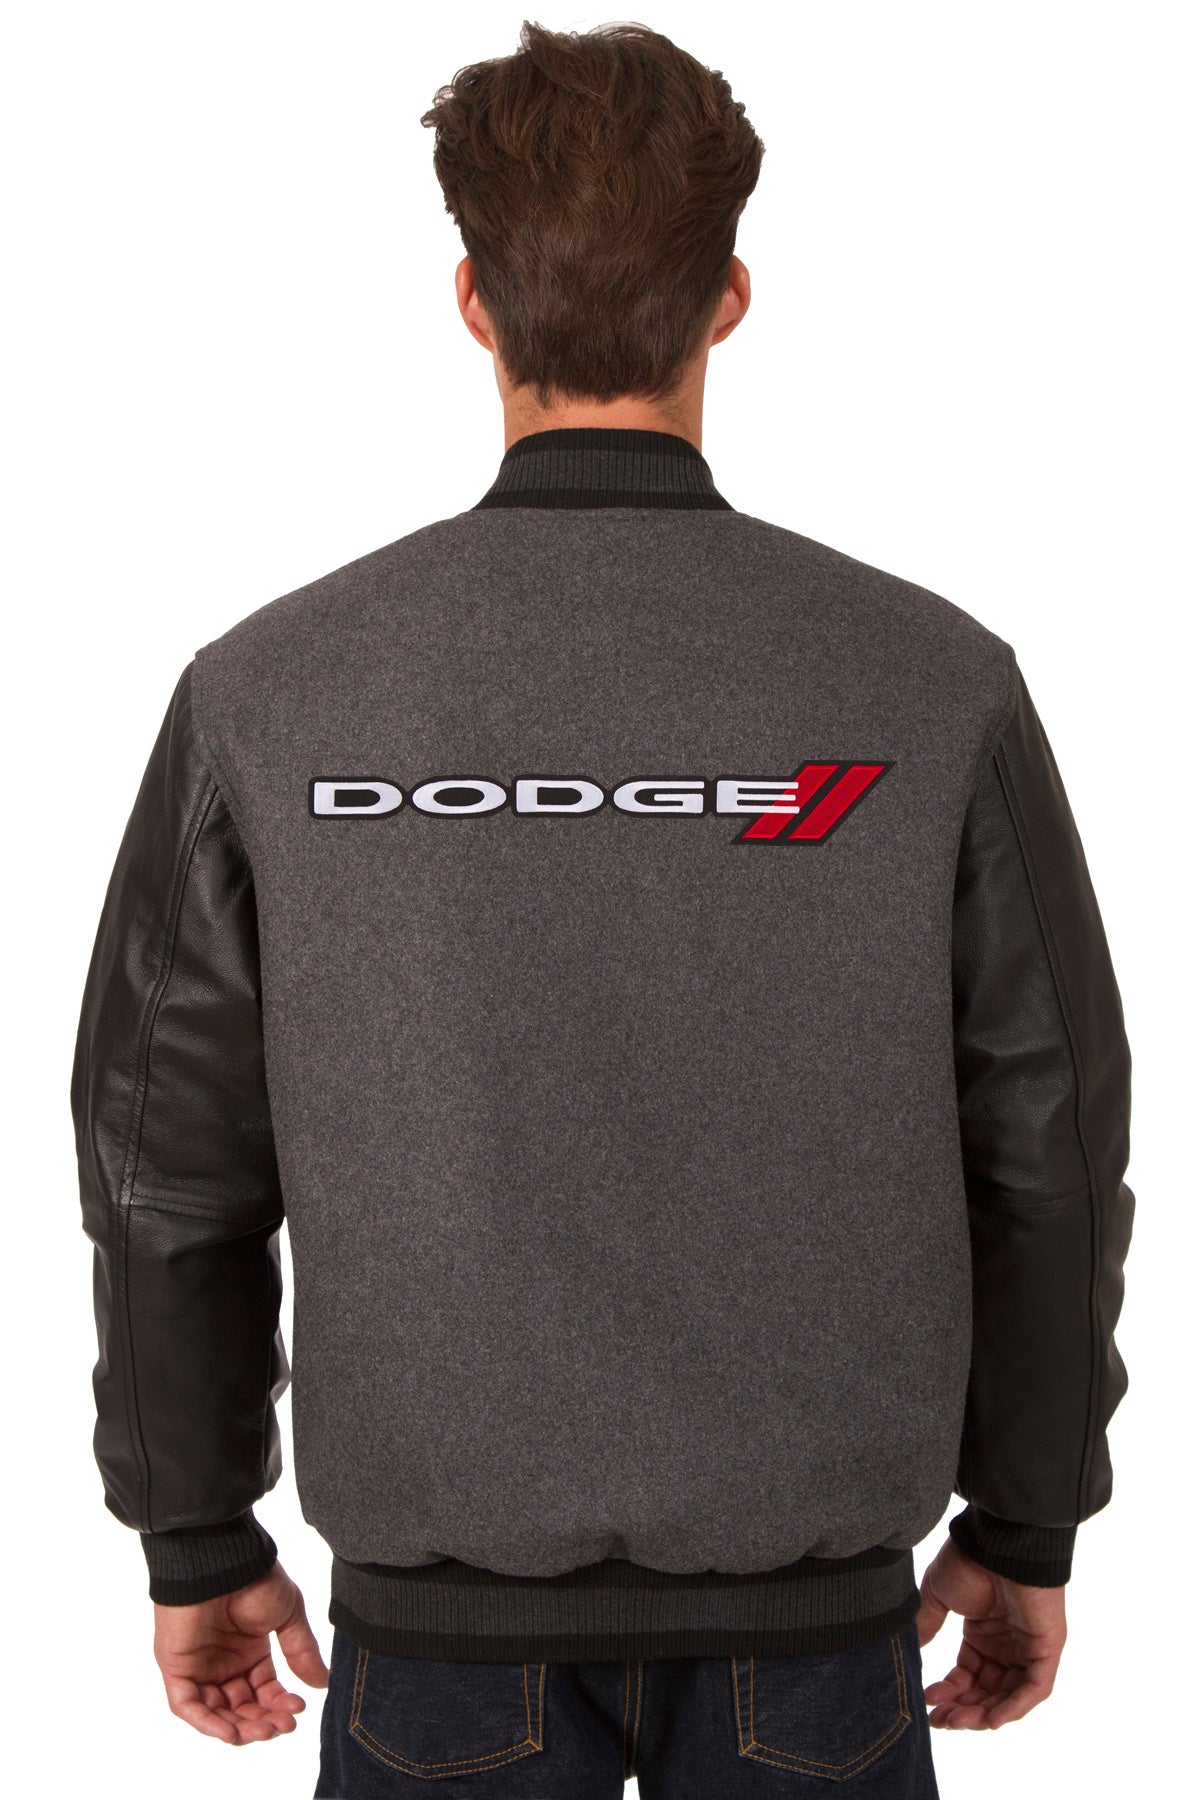 Dodge Reversible Wool and Leather Jacket